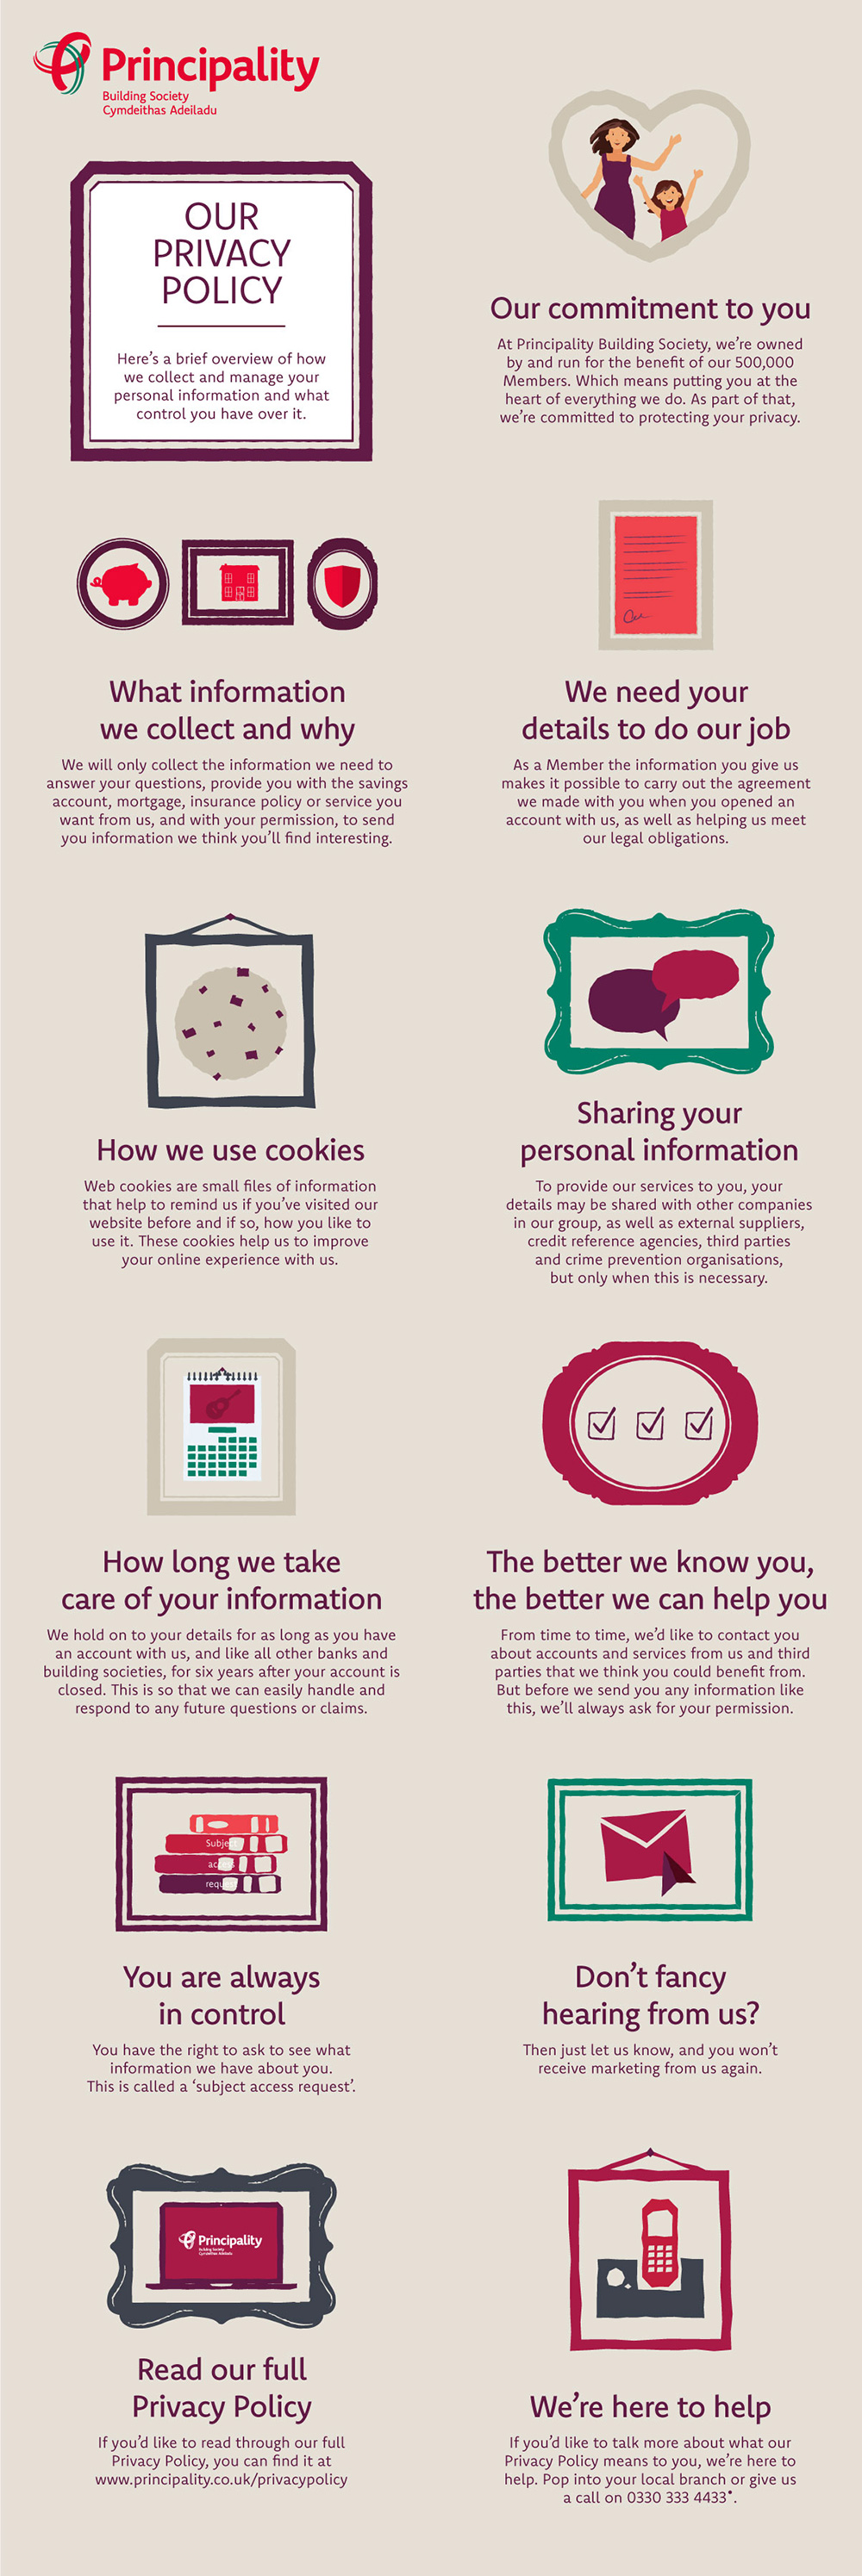 Privacy Policy Infographic